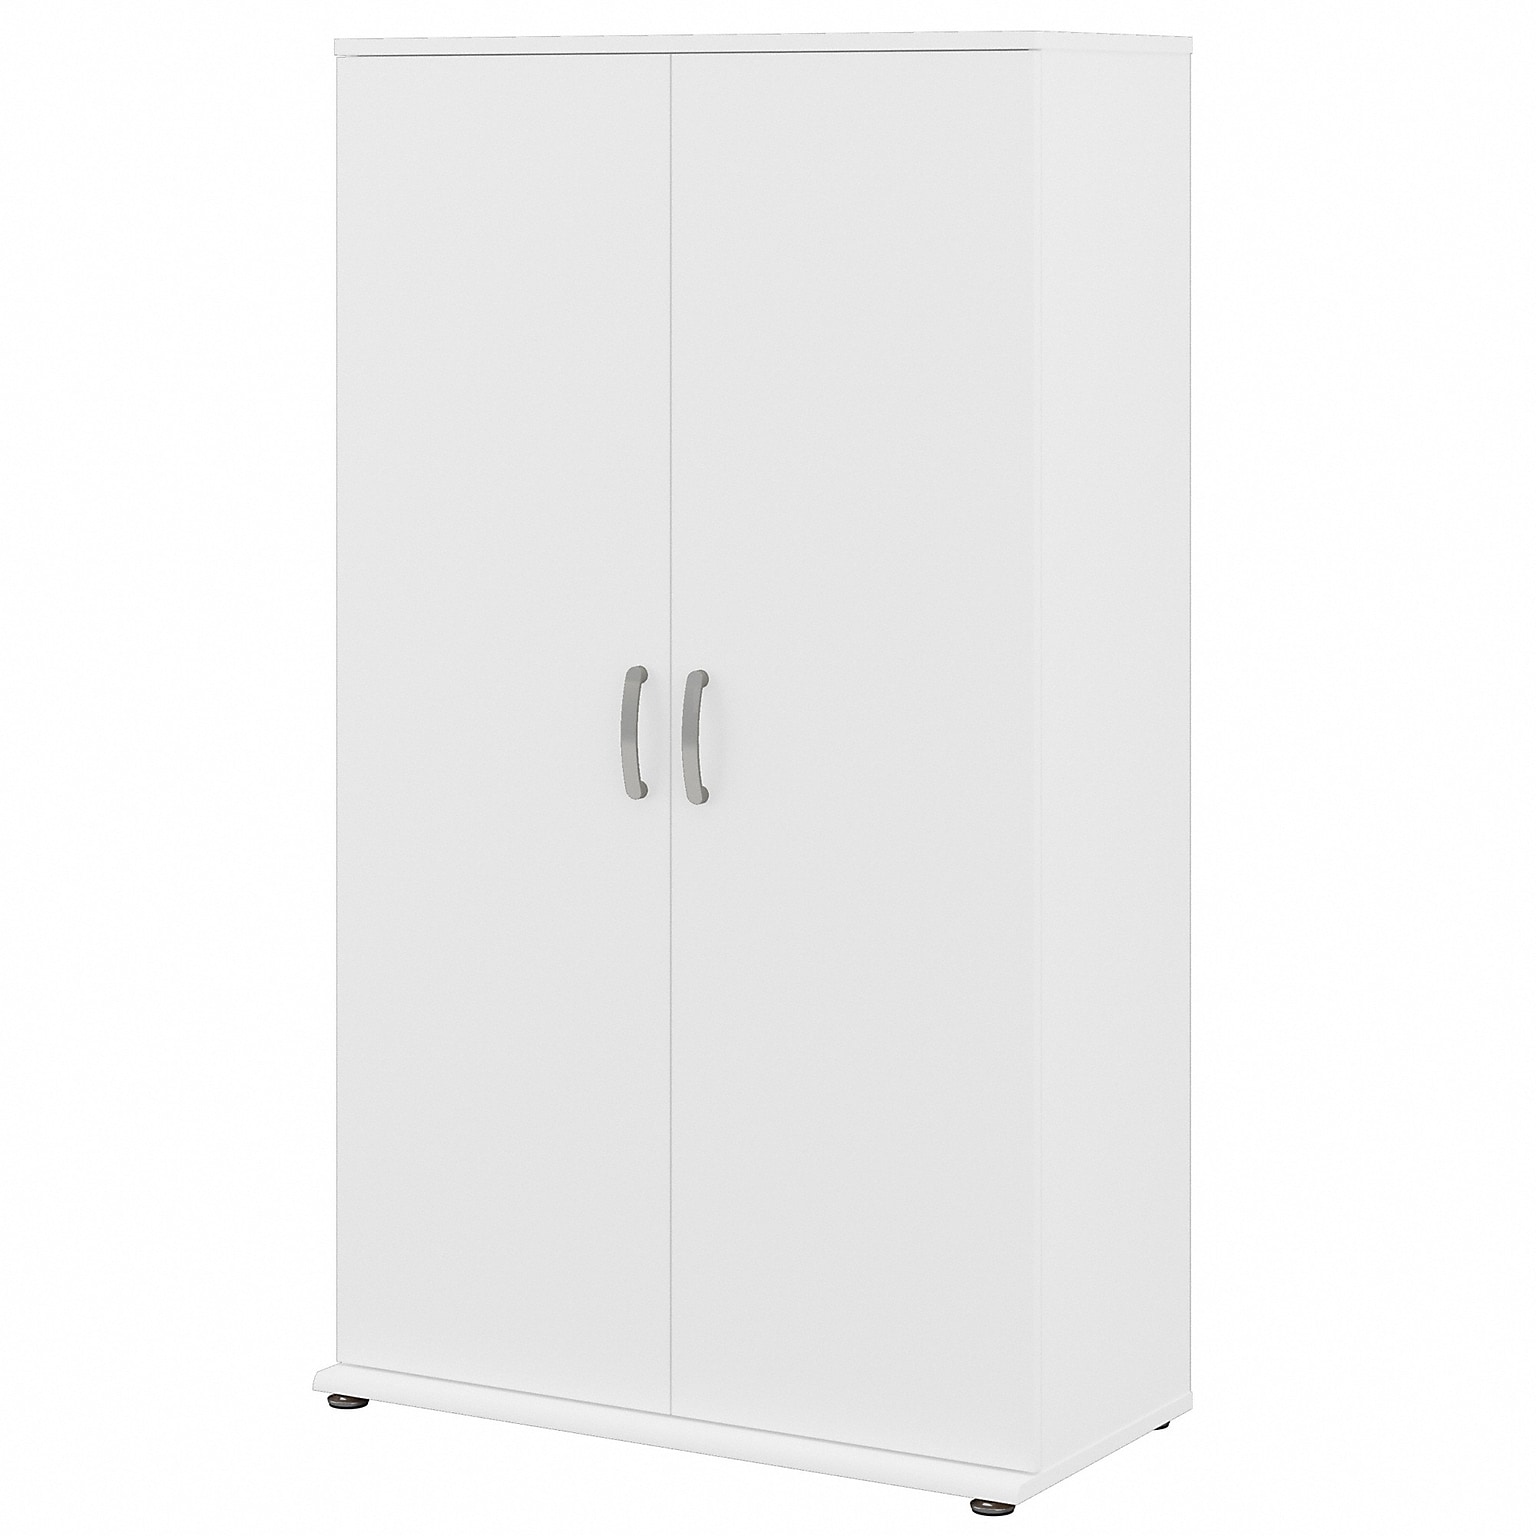 Bush Business Furniture Universal 62 Tall Storage Cabinet with Doors and 5 Shelves, White (UNS136WHK)